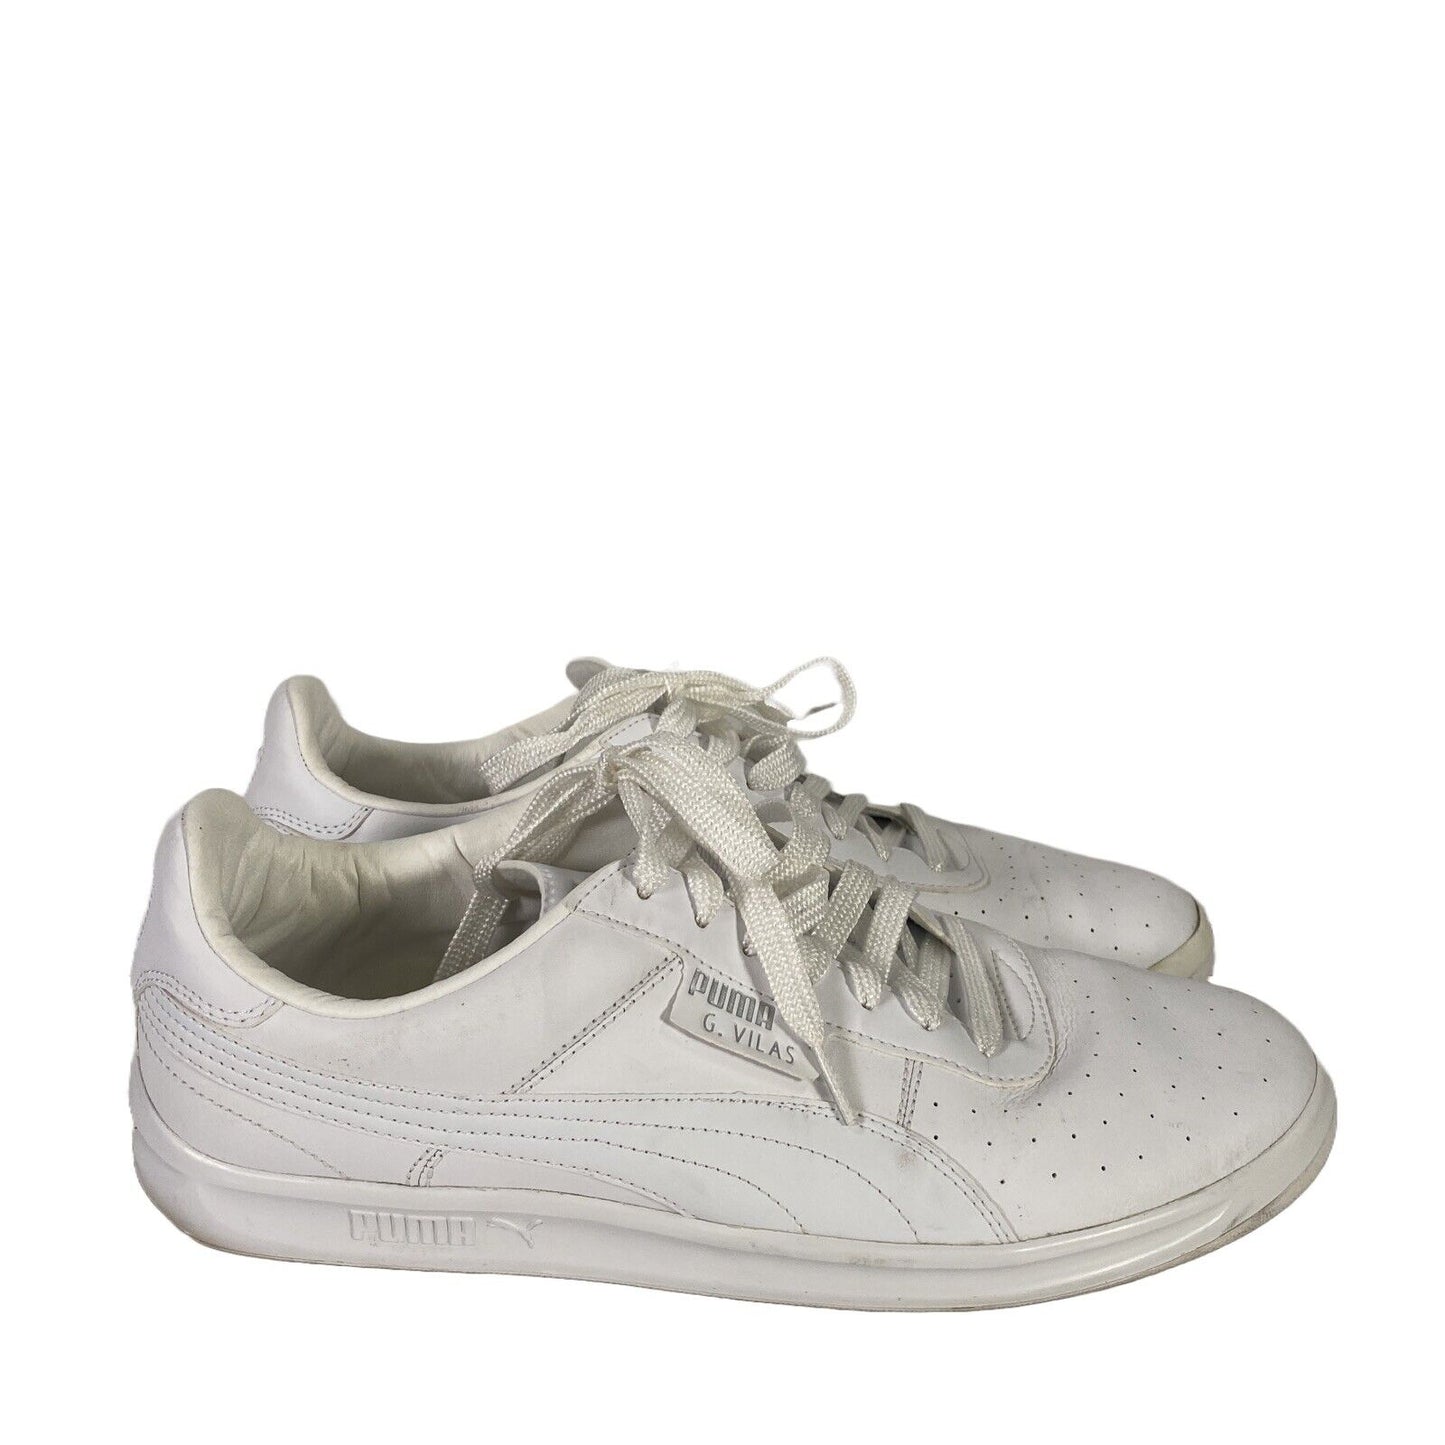 Puma Men's White Leather G.Vilas Lace Up Casual Sneakers - 13